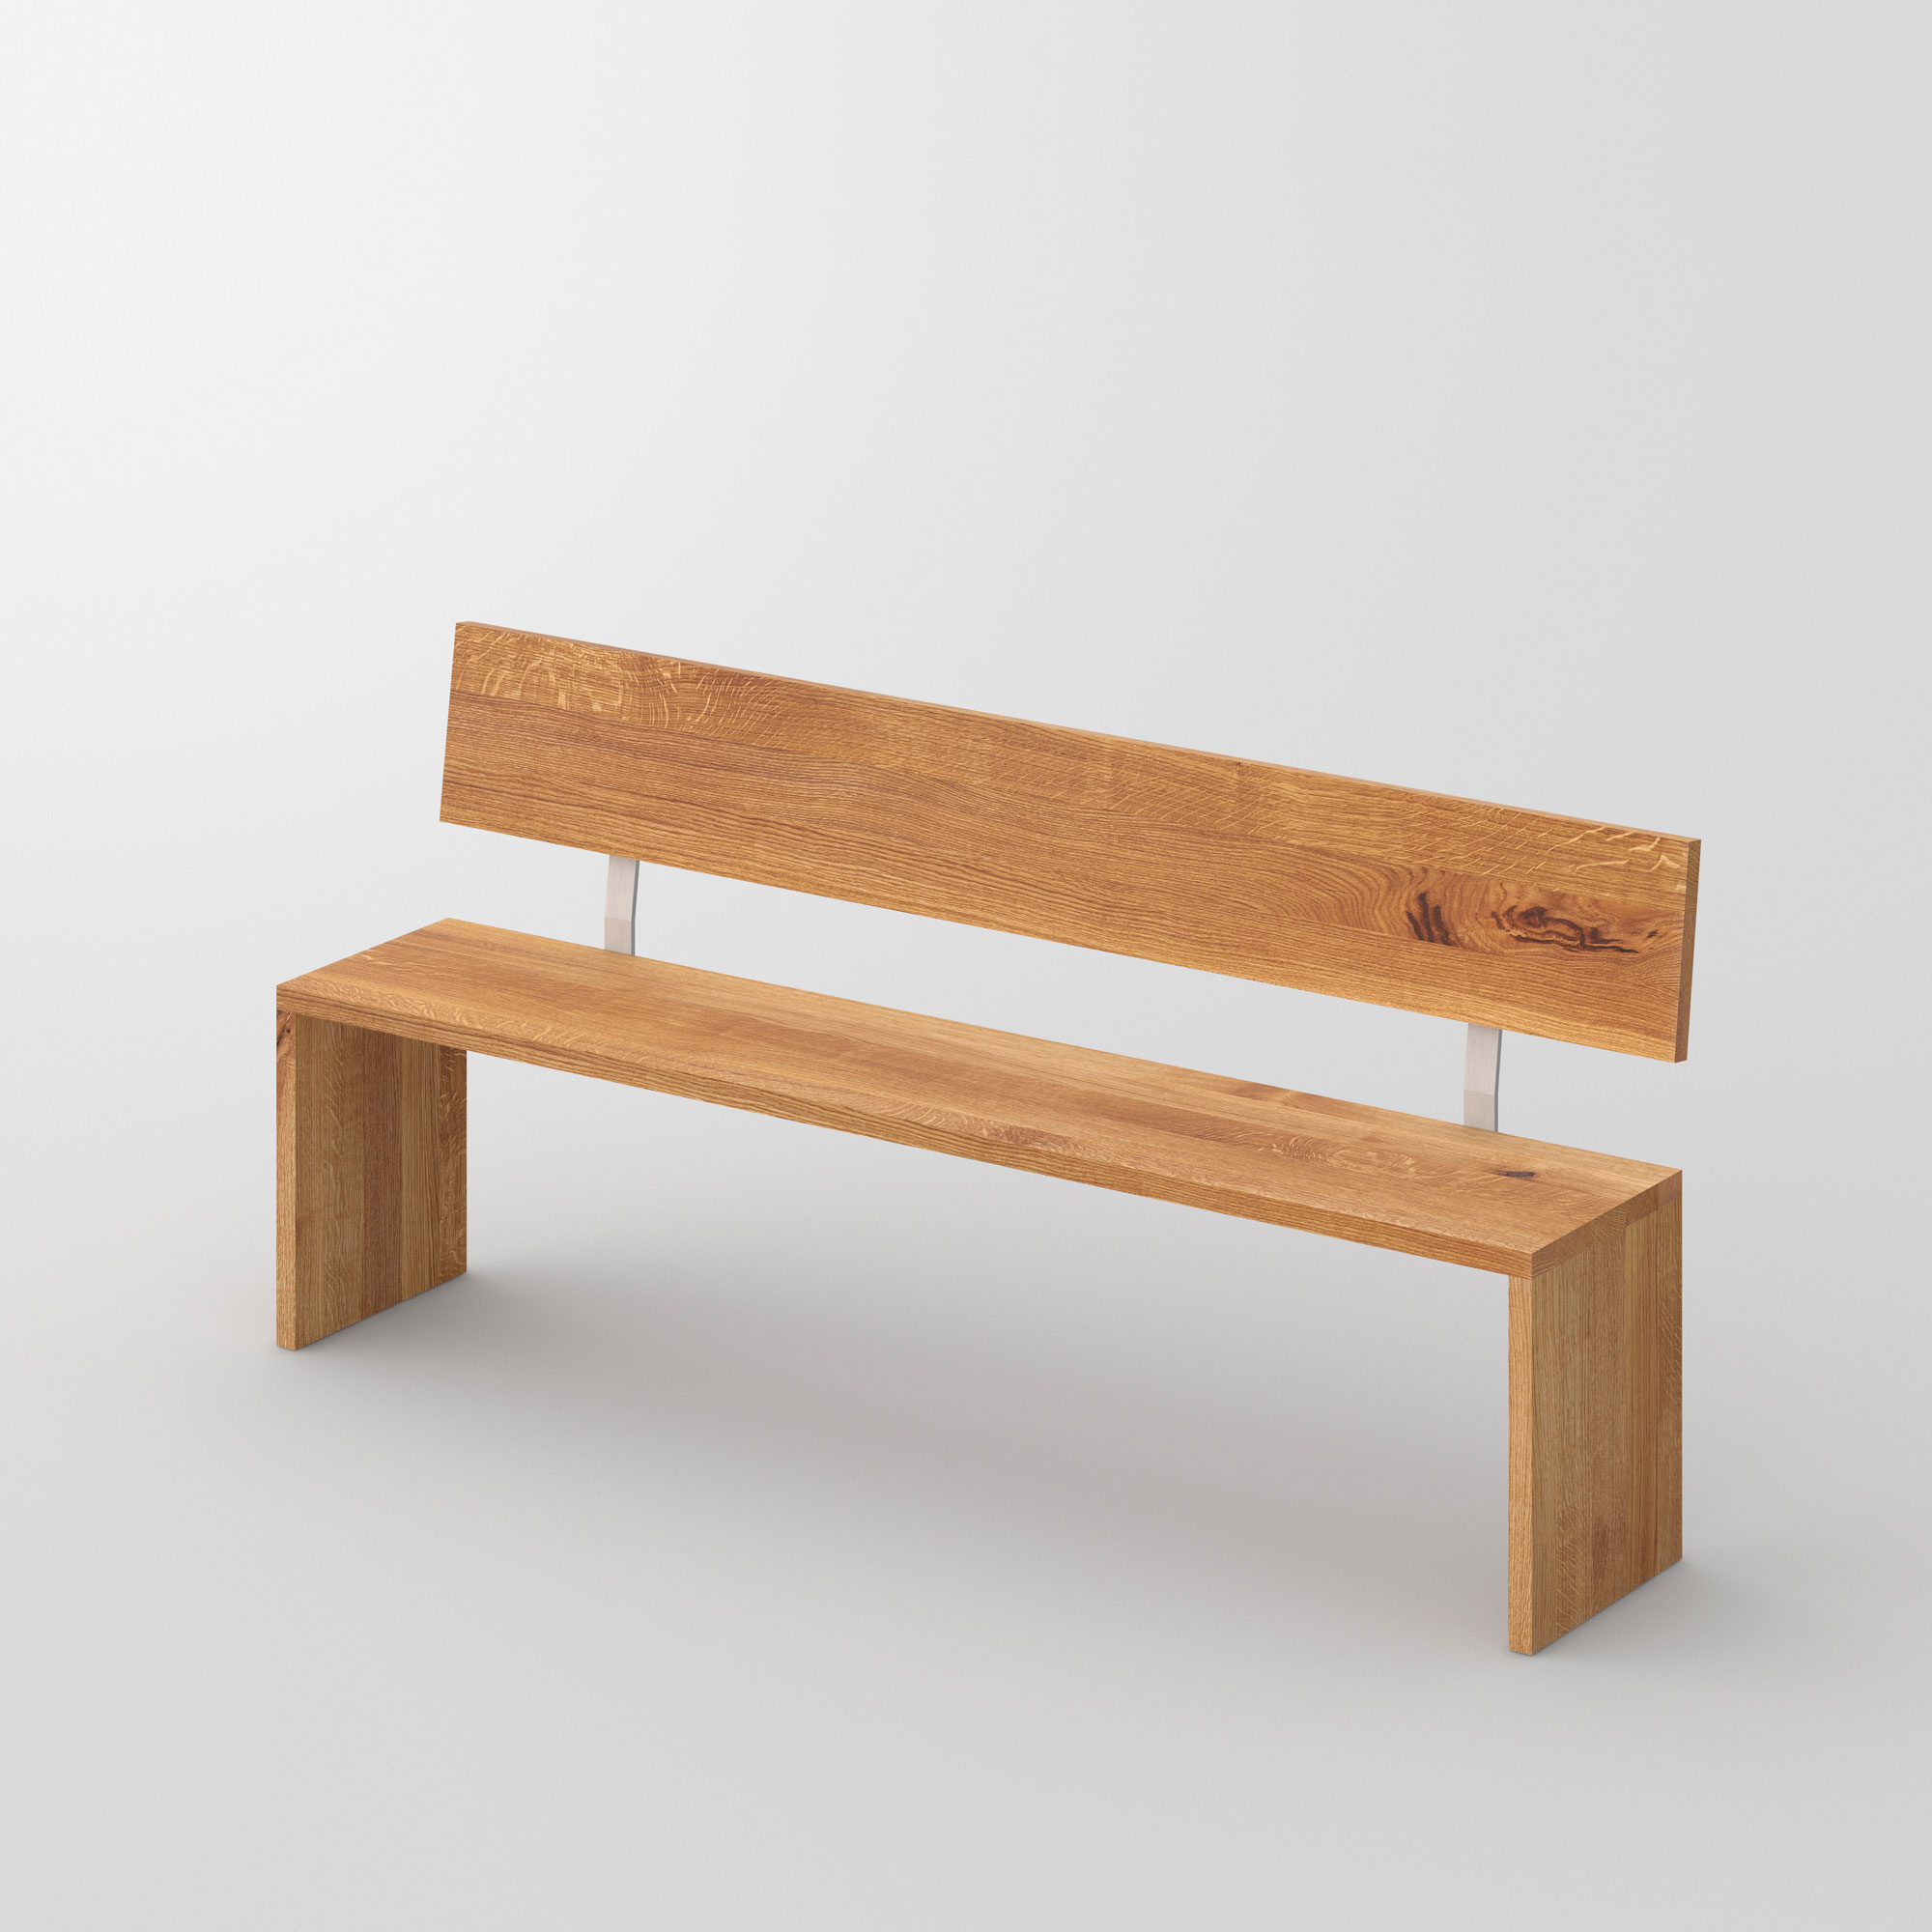 Solid Wood Bench MENA 3 cam1 custom made in solid wood by vitamin design